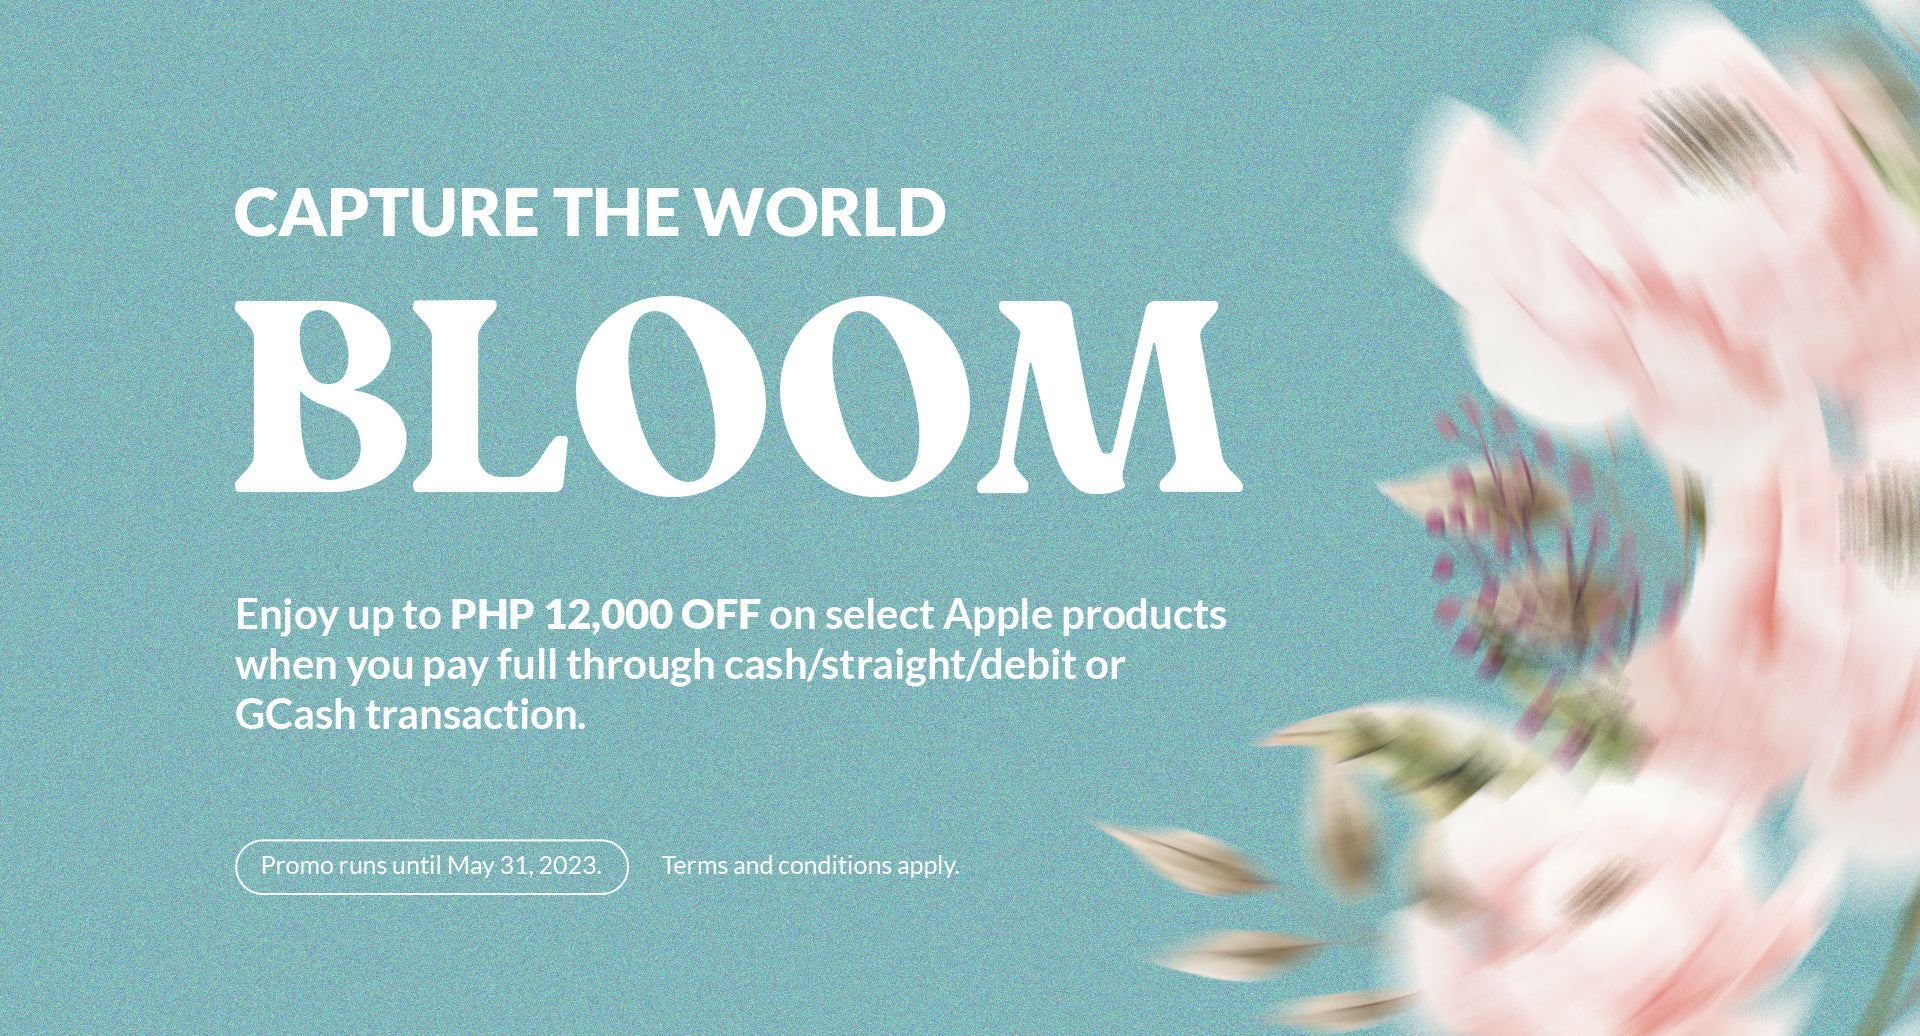 Capture the world in bloom! Enjoy up to P12,000 off on select Apple products.